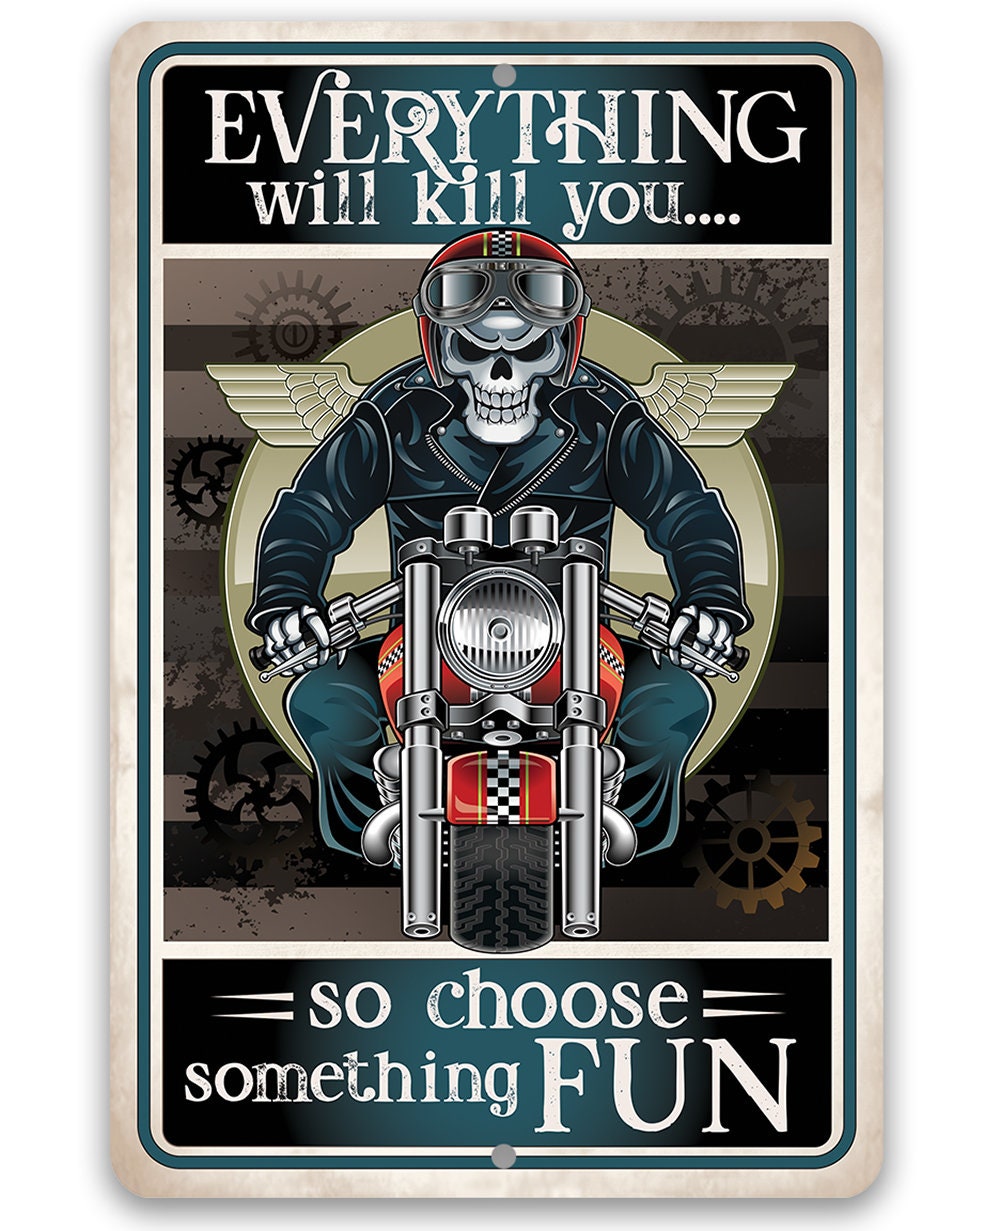 Everything Will Kill You So Choose Fun - 8" x 12" or 12" x 18" Aluminum Tin Awesome Metal Poster Lone Star Art 